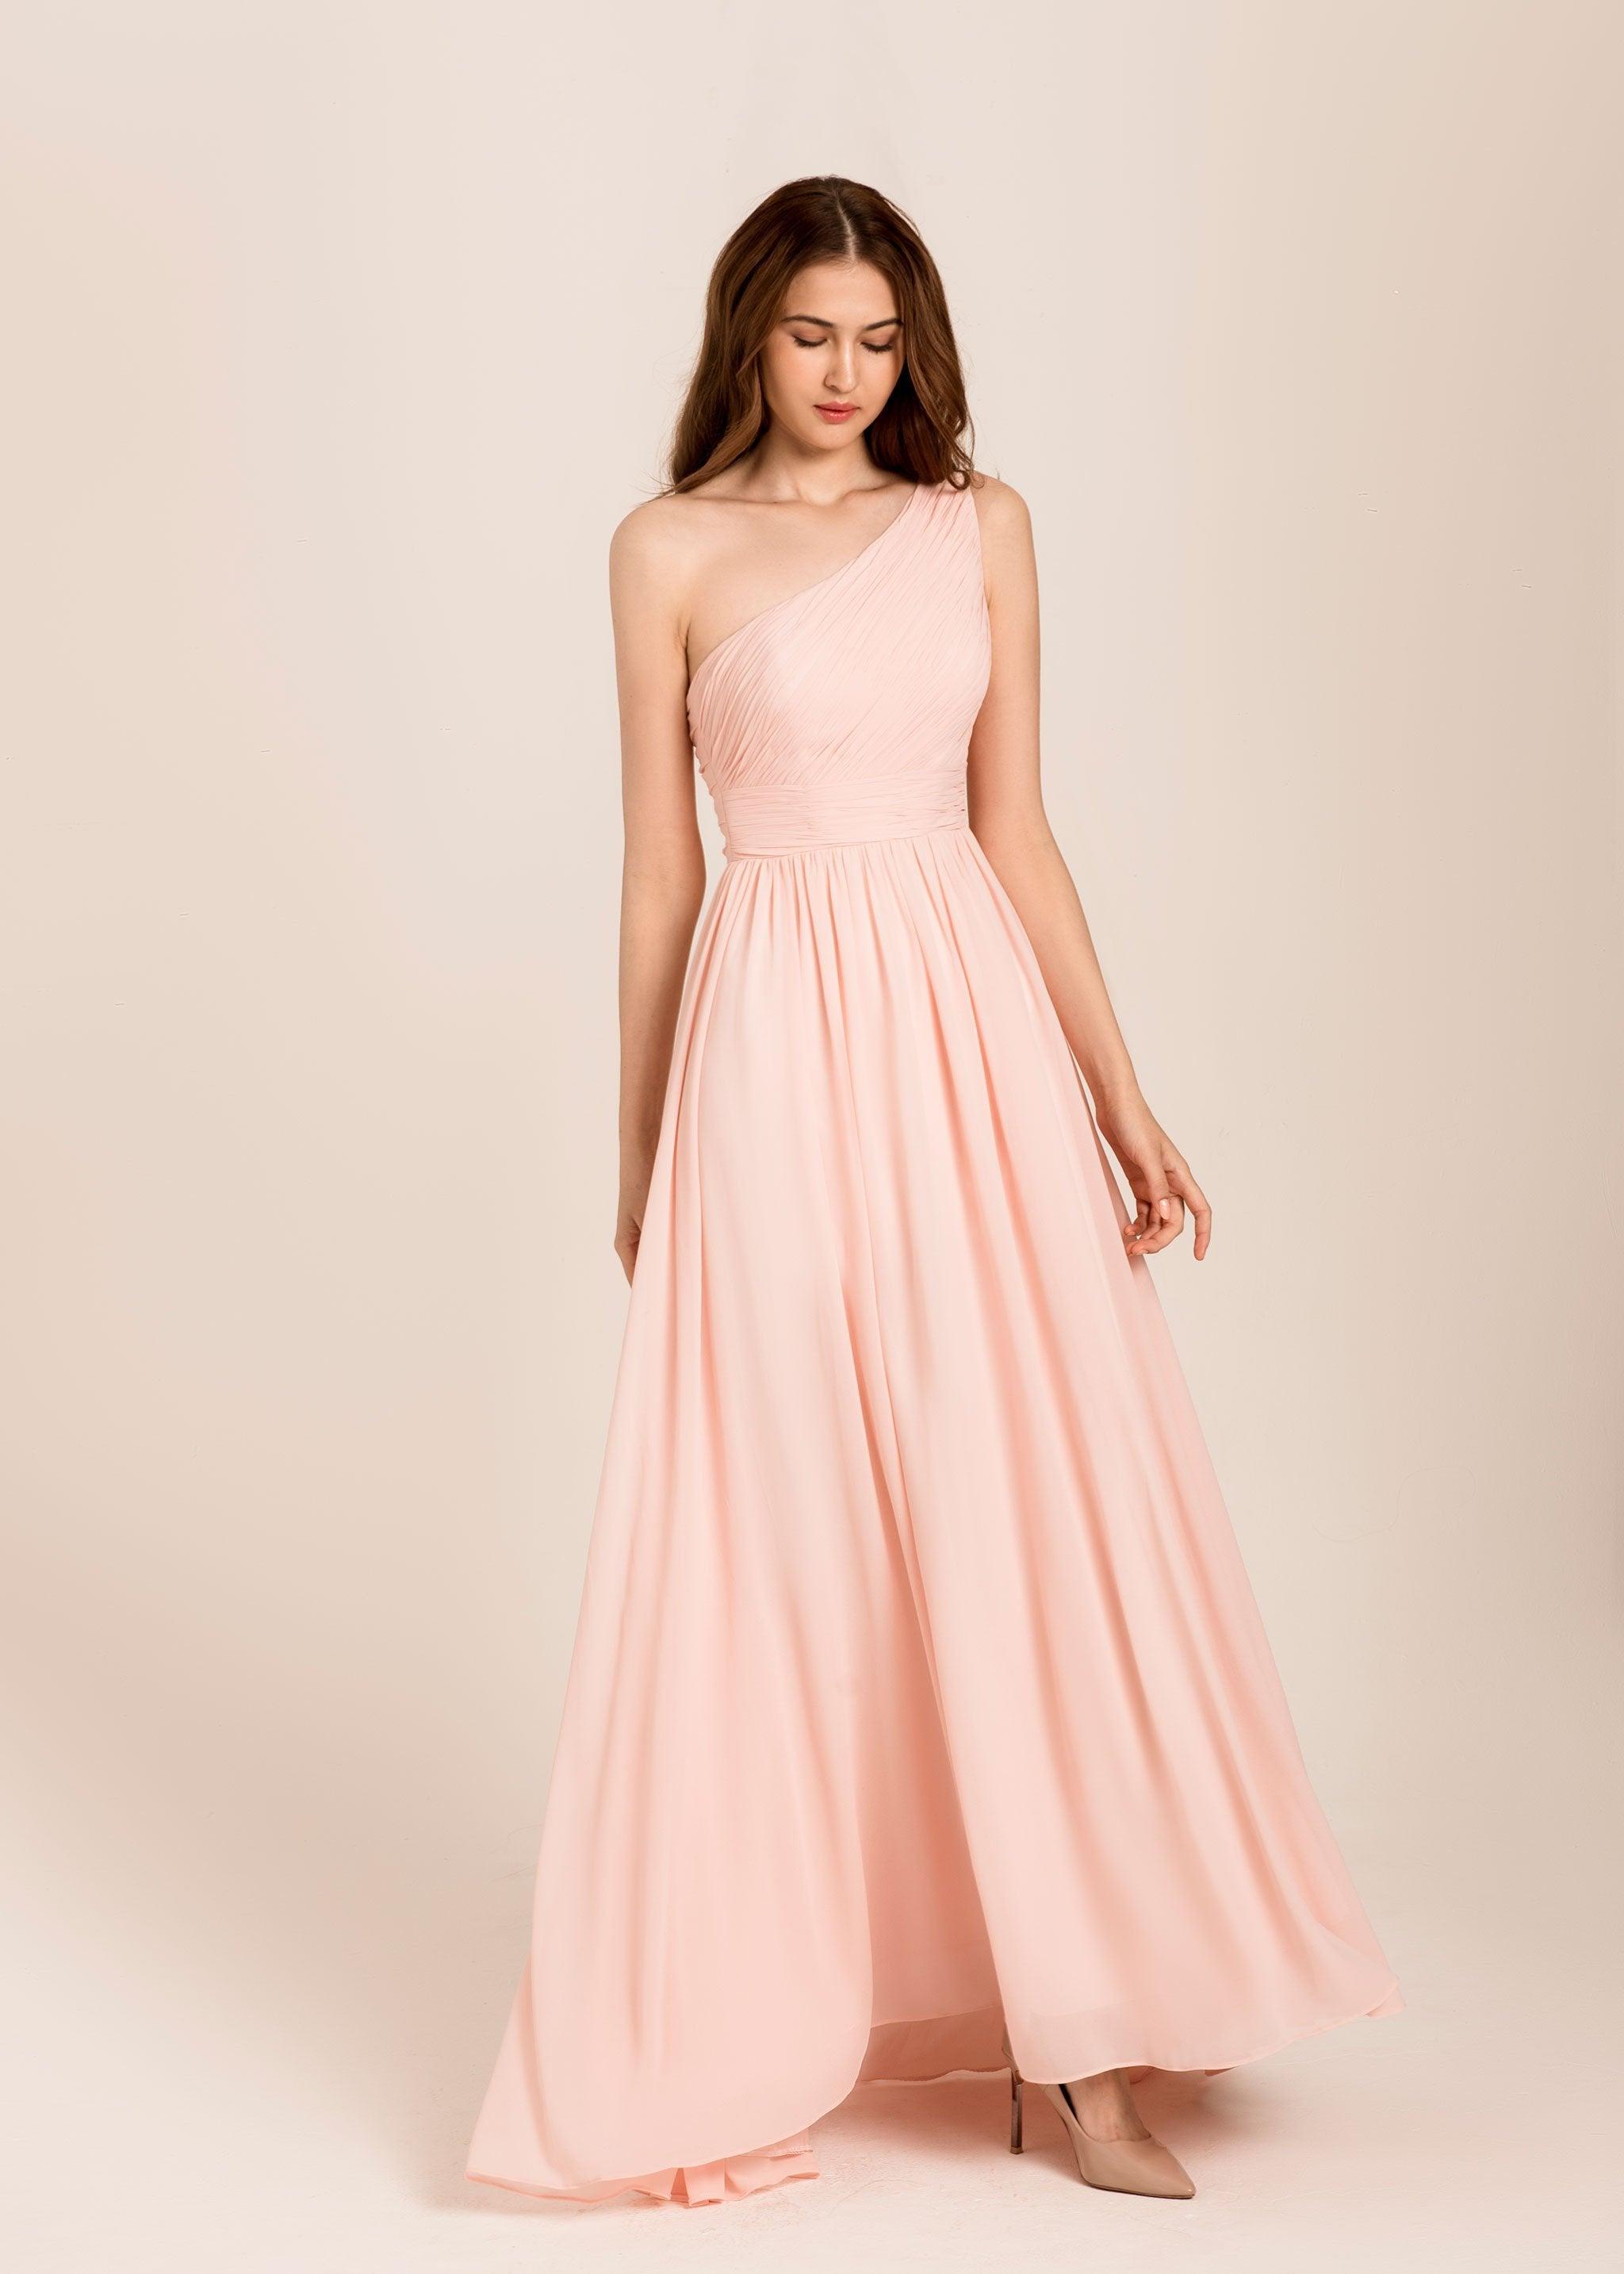 One Shoulder Bridesmaid Dress | Light Pink Dress | Dare and Dazzle